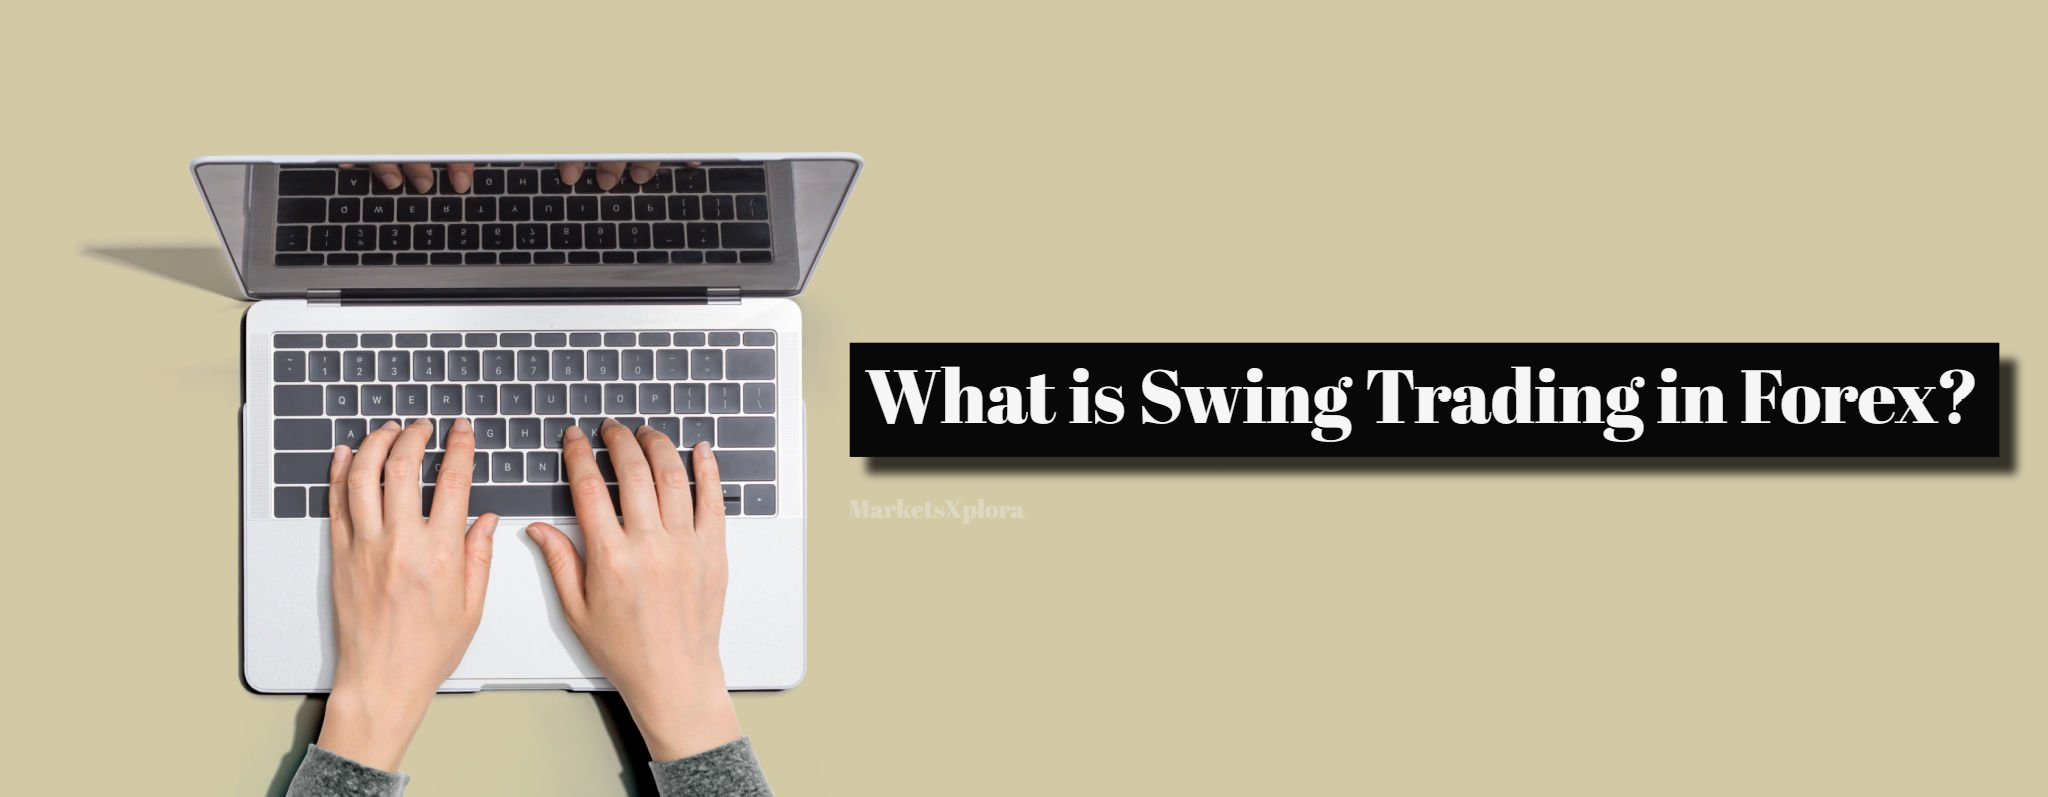 If you don't know the answer to "What is swing trading in forex?", this intro guide covers all the basics beginners need from trading skills to profit strategies.